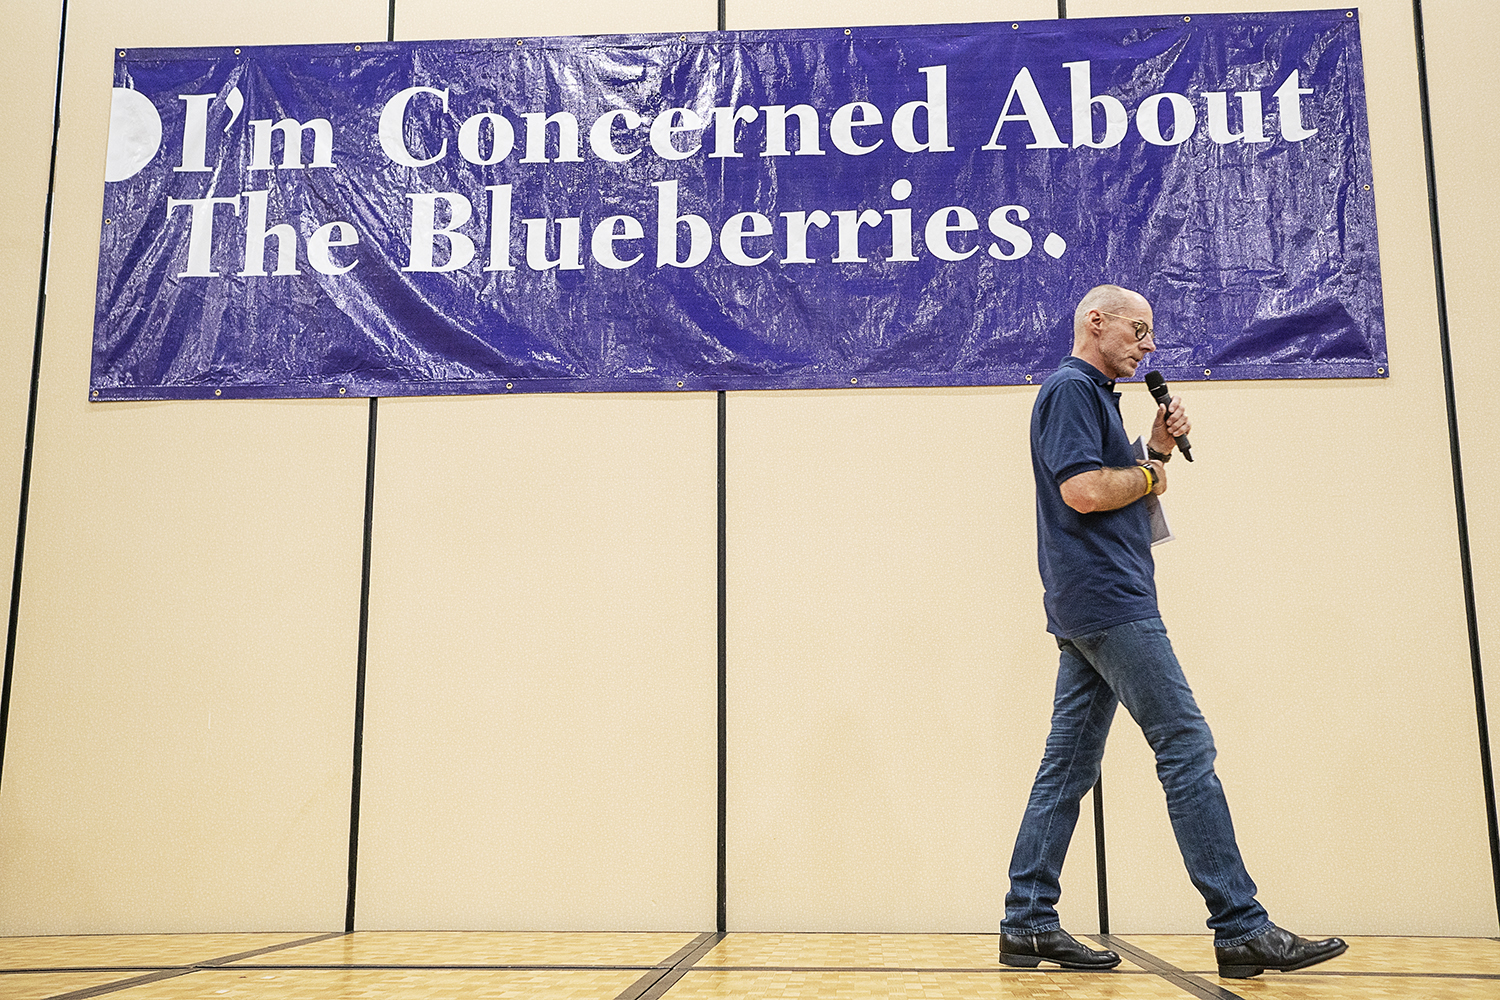 Flint, MI - Friday, May 4, 2018: Fenton Twp. resident Phil Shaltz, 69, Blueberry Founder, paces on the stage as he speaks to the Blueberry Ambassadors during the 5th Annual Blueberry Ambassador Awards Party at the Riverfront Banquet Center downtown.